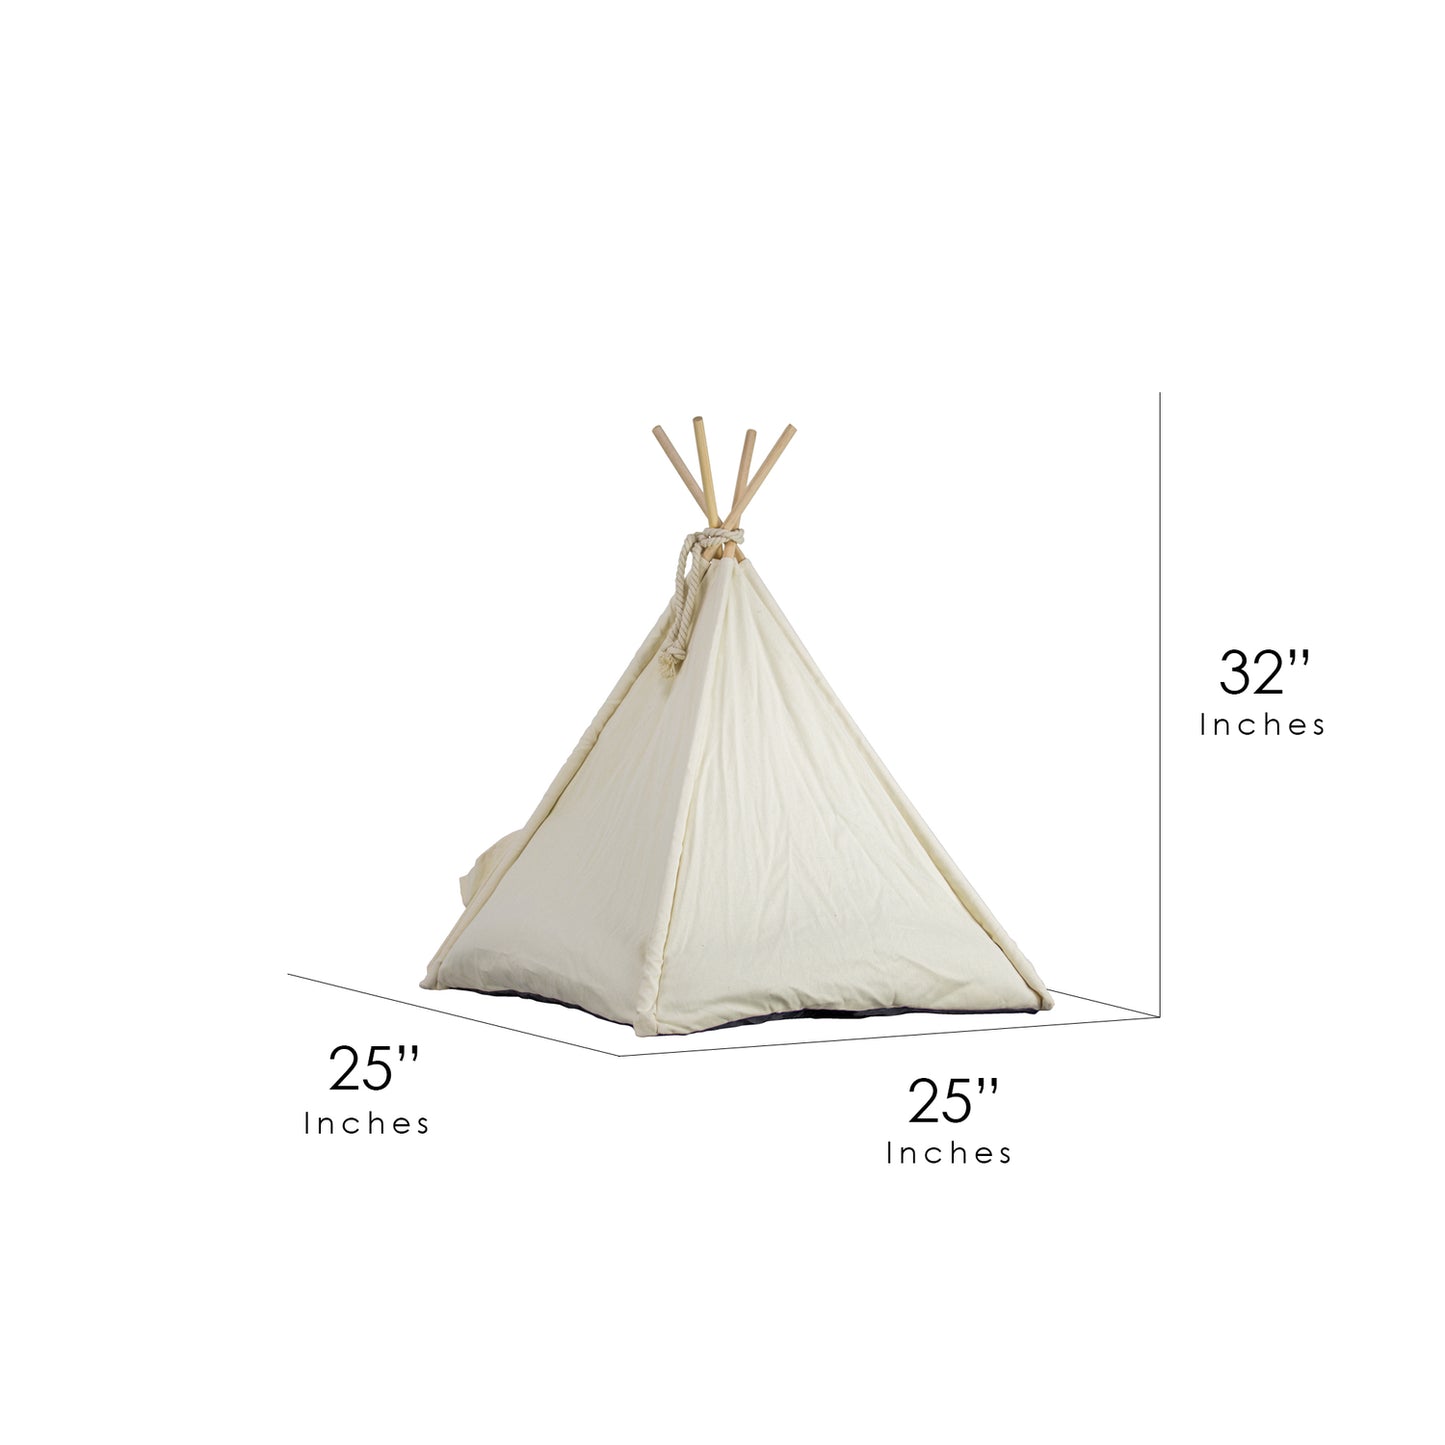 American Art Decor Pet Teepee Portable Dog & Cat Bed with Cushion - Beige